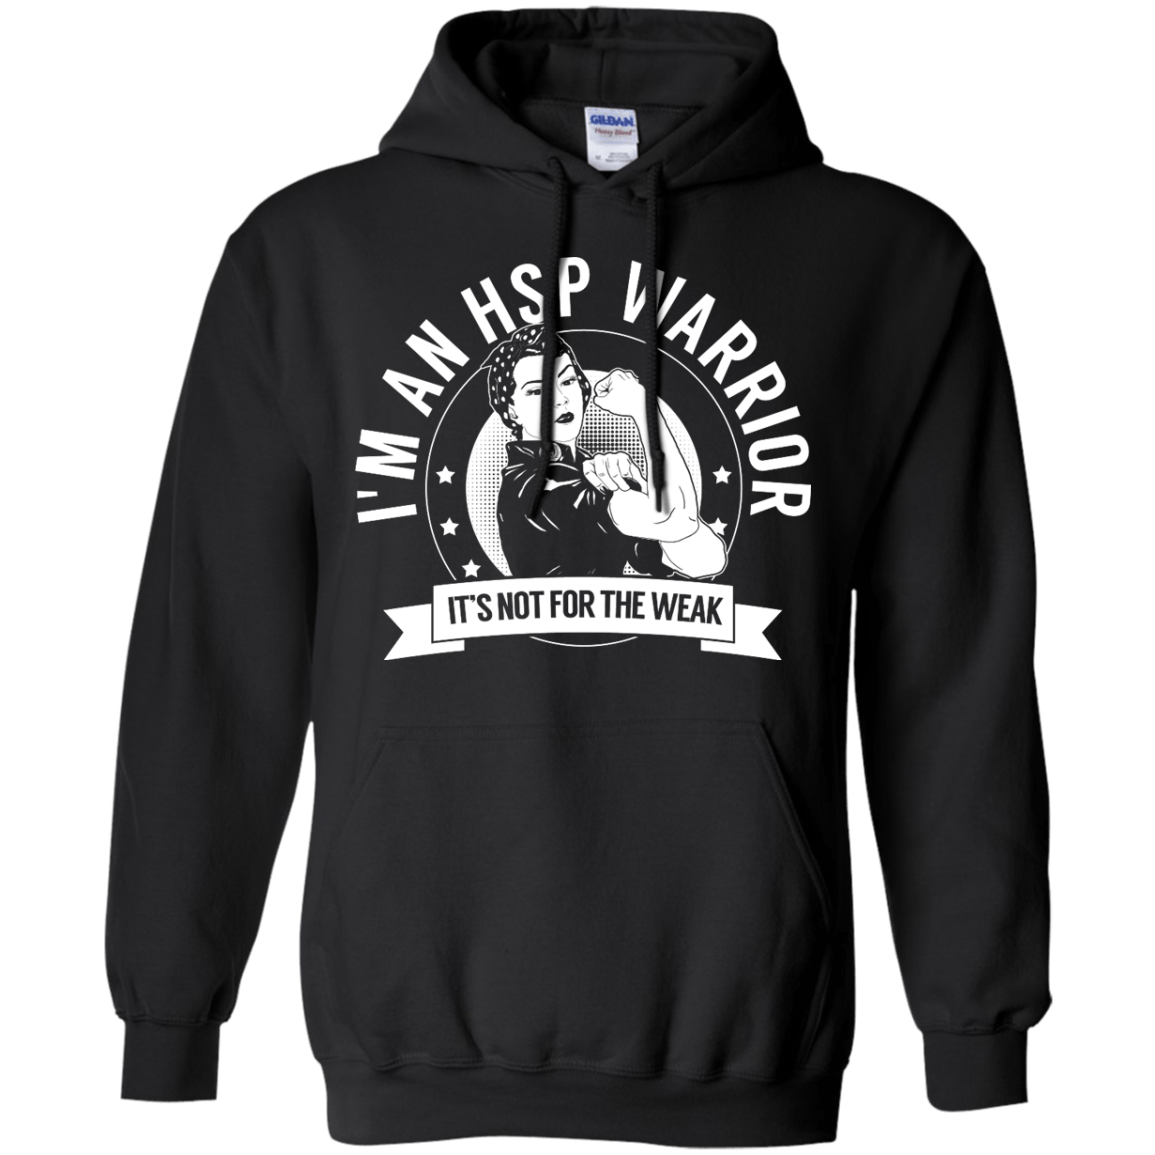 Hereditary Spastic Paraparesis - HSP Warrior Not For The Weak Pullover Hoodie 8 oz - The Unchargeables